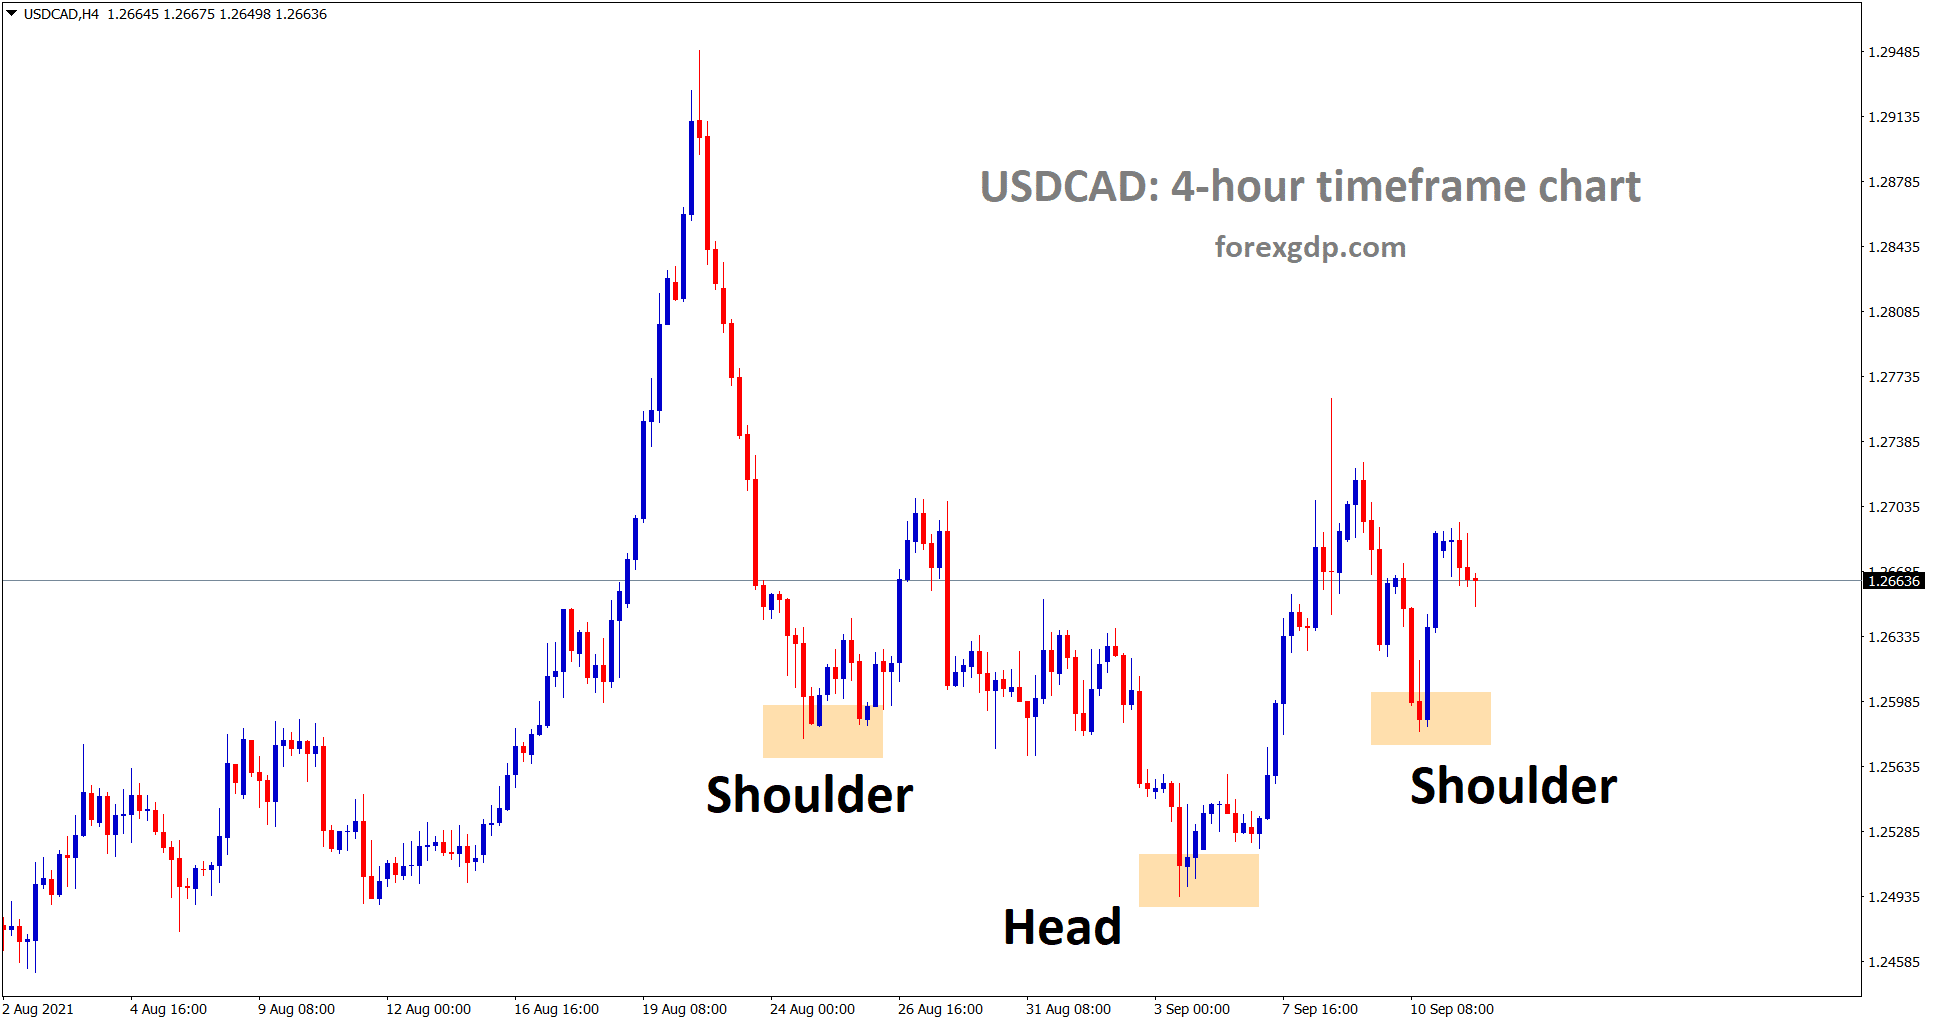 In another view USDCAD is trying to create a Inverse Head and Shoulder pattern